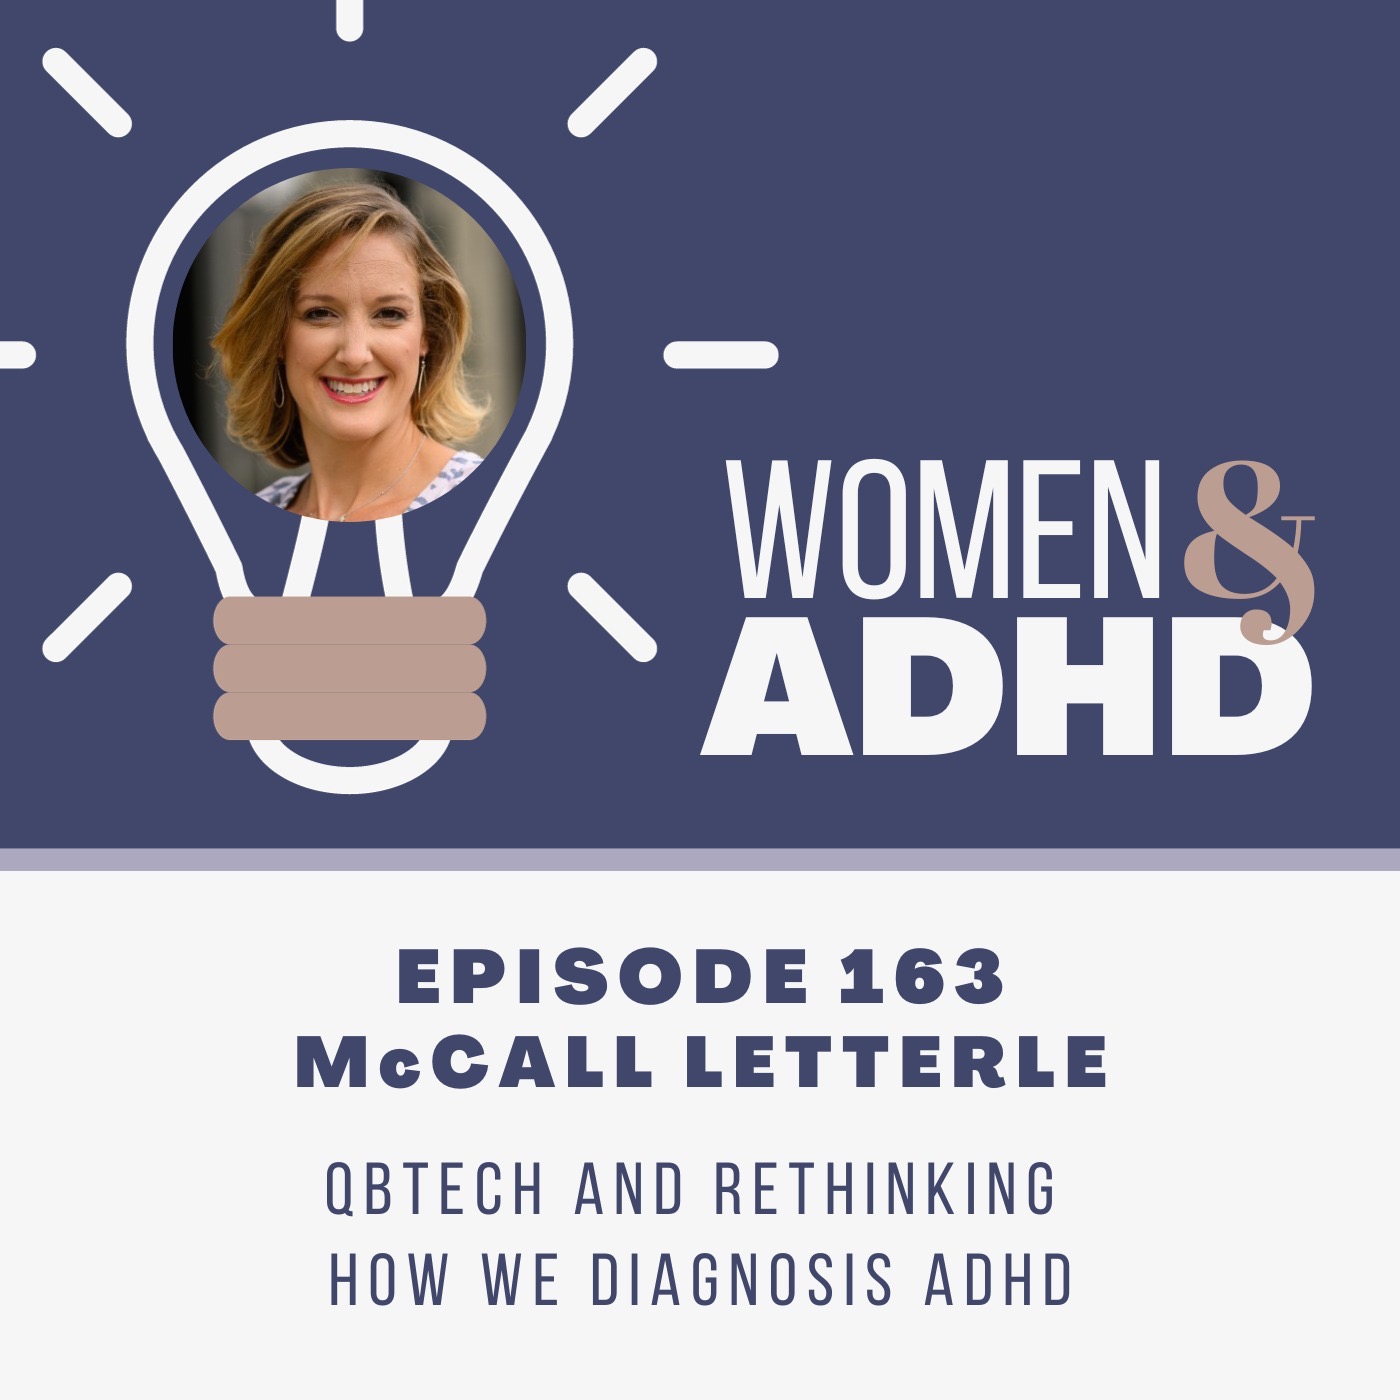 McCall Letterle: Qbtech and rethinking how we diagnose ADHD